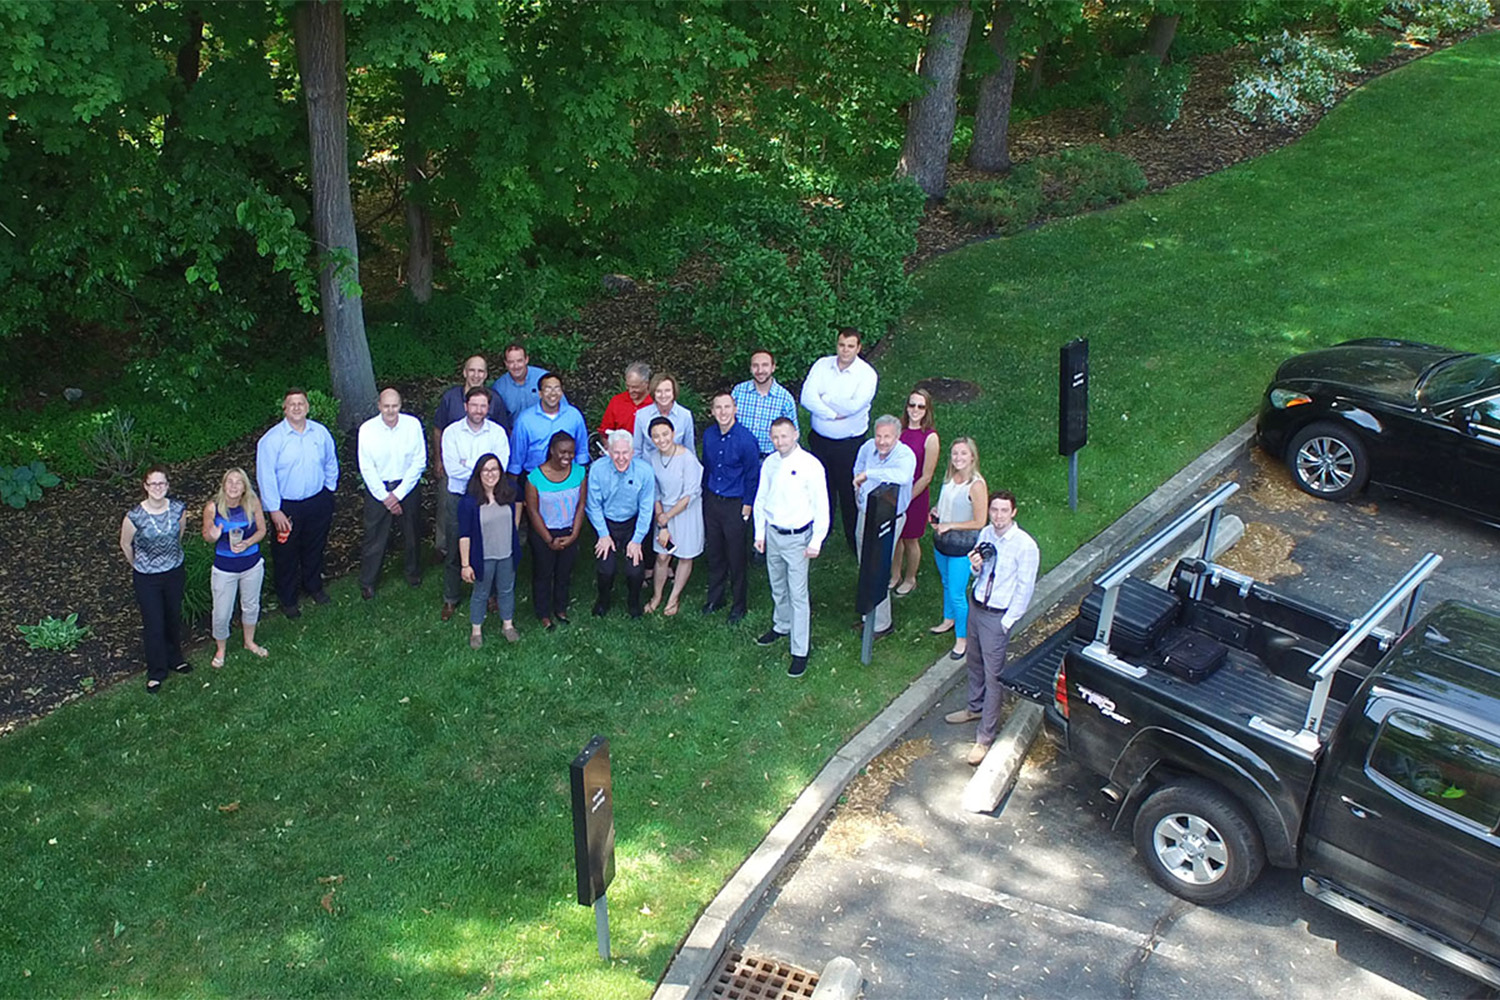 Tocci employees pose for group photo - photo taken by drone 